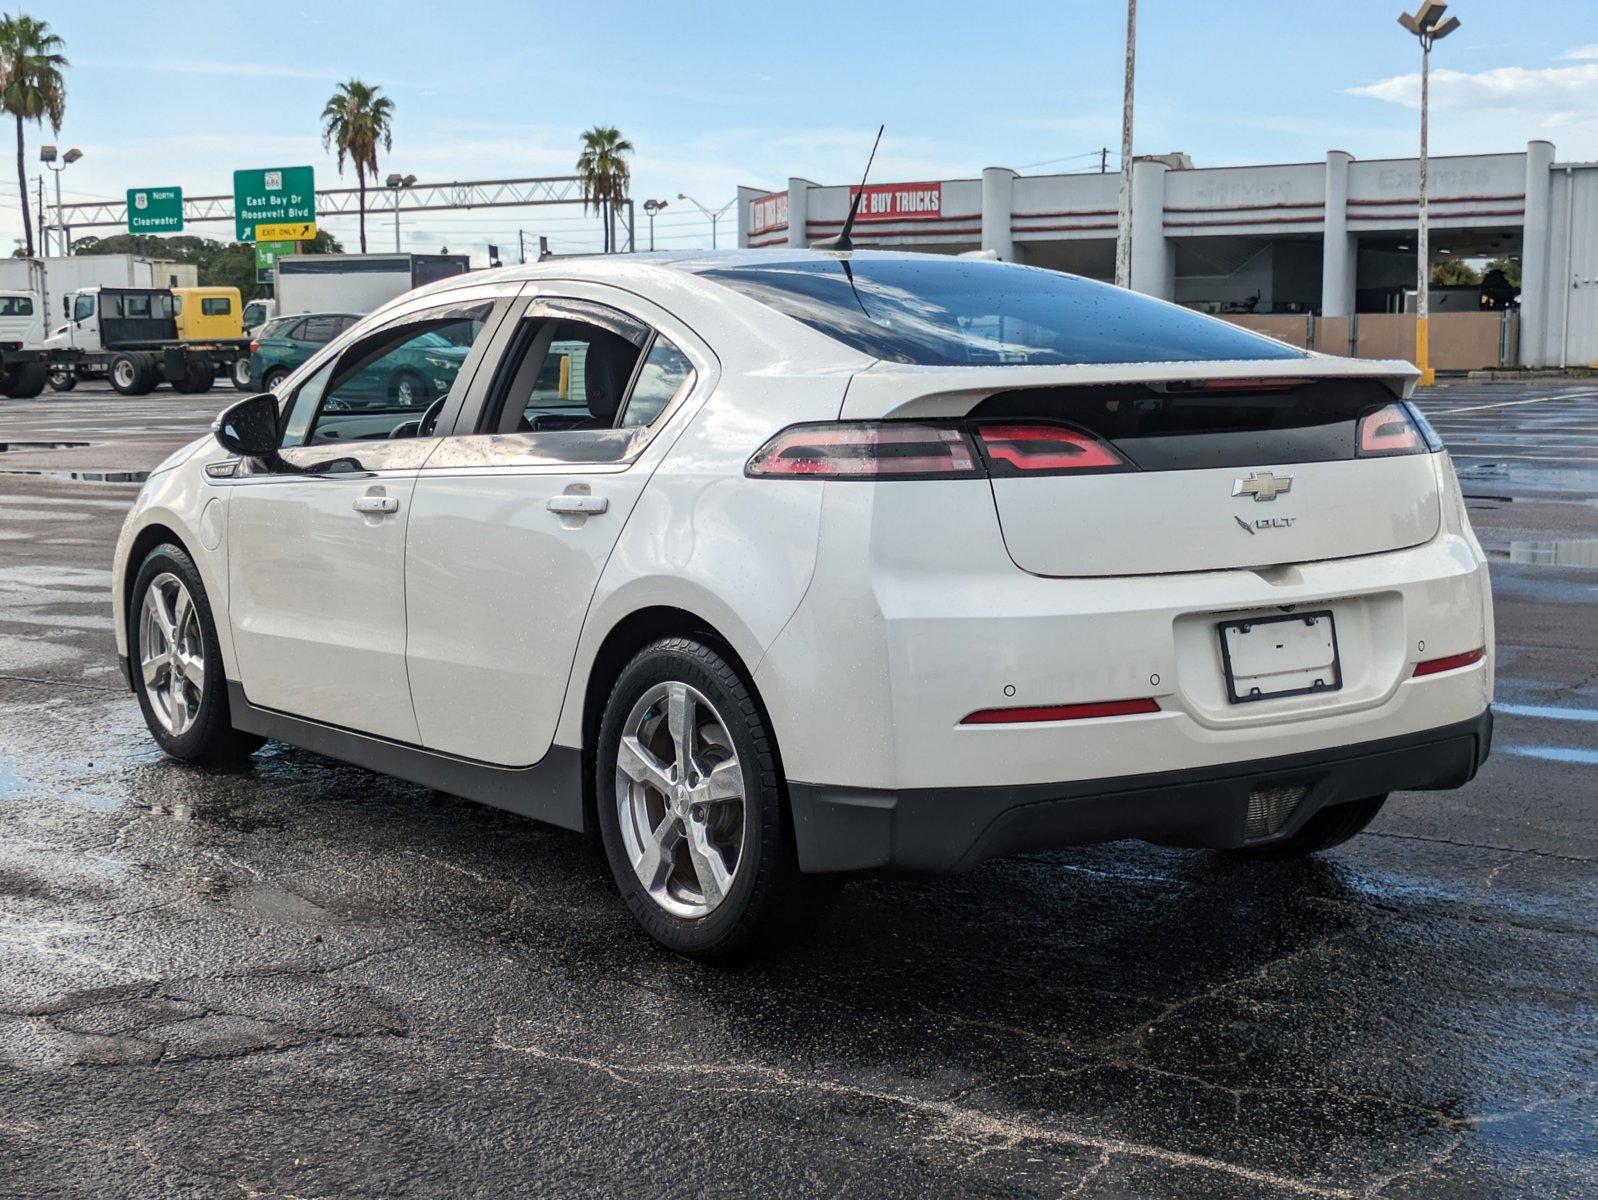 2014 Chevrolet Volt Vehicle Photo in CLEARWATER, FL 33764-7163